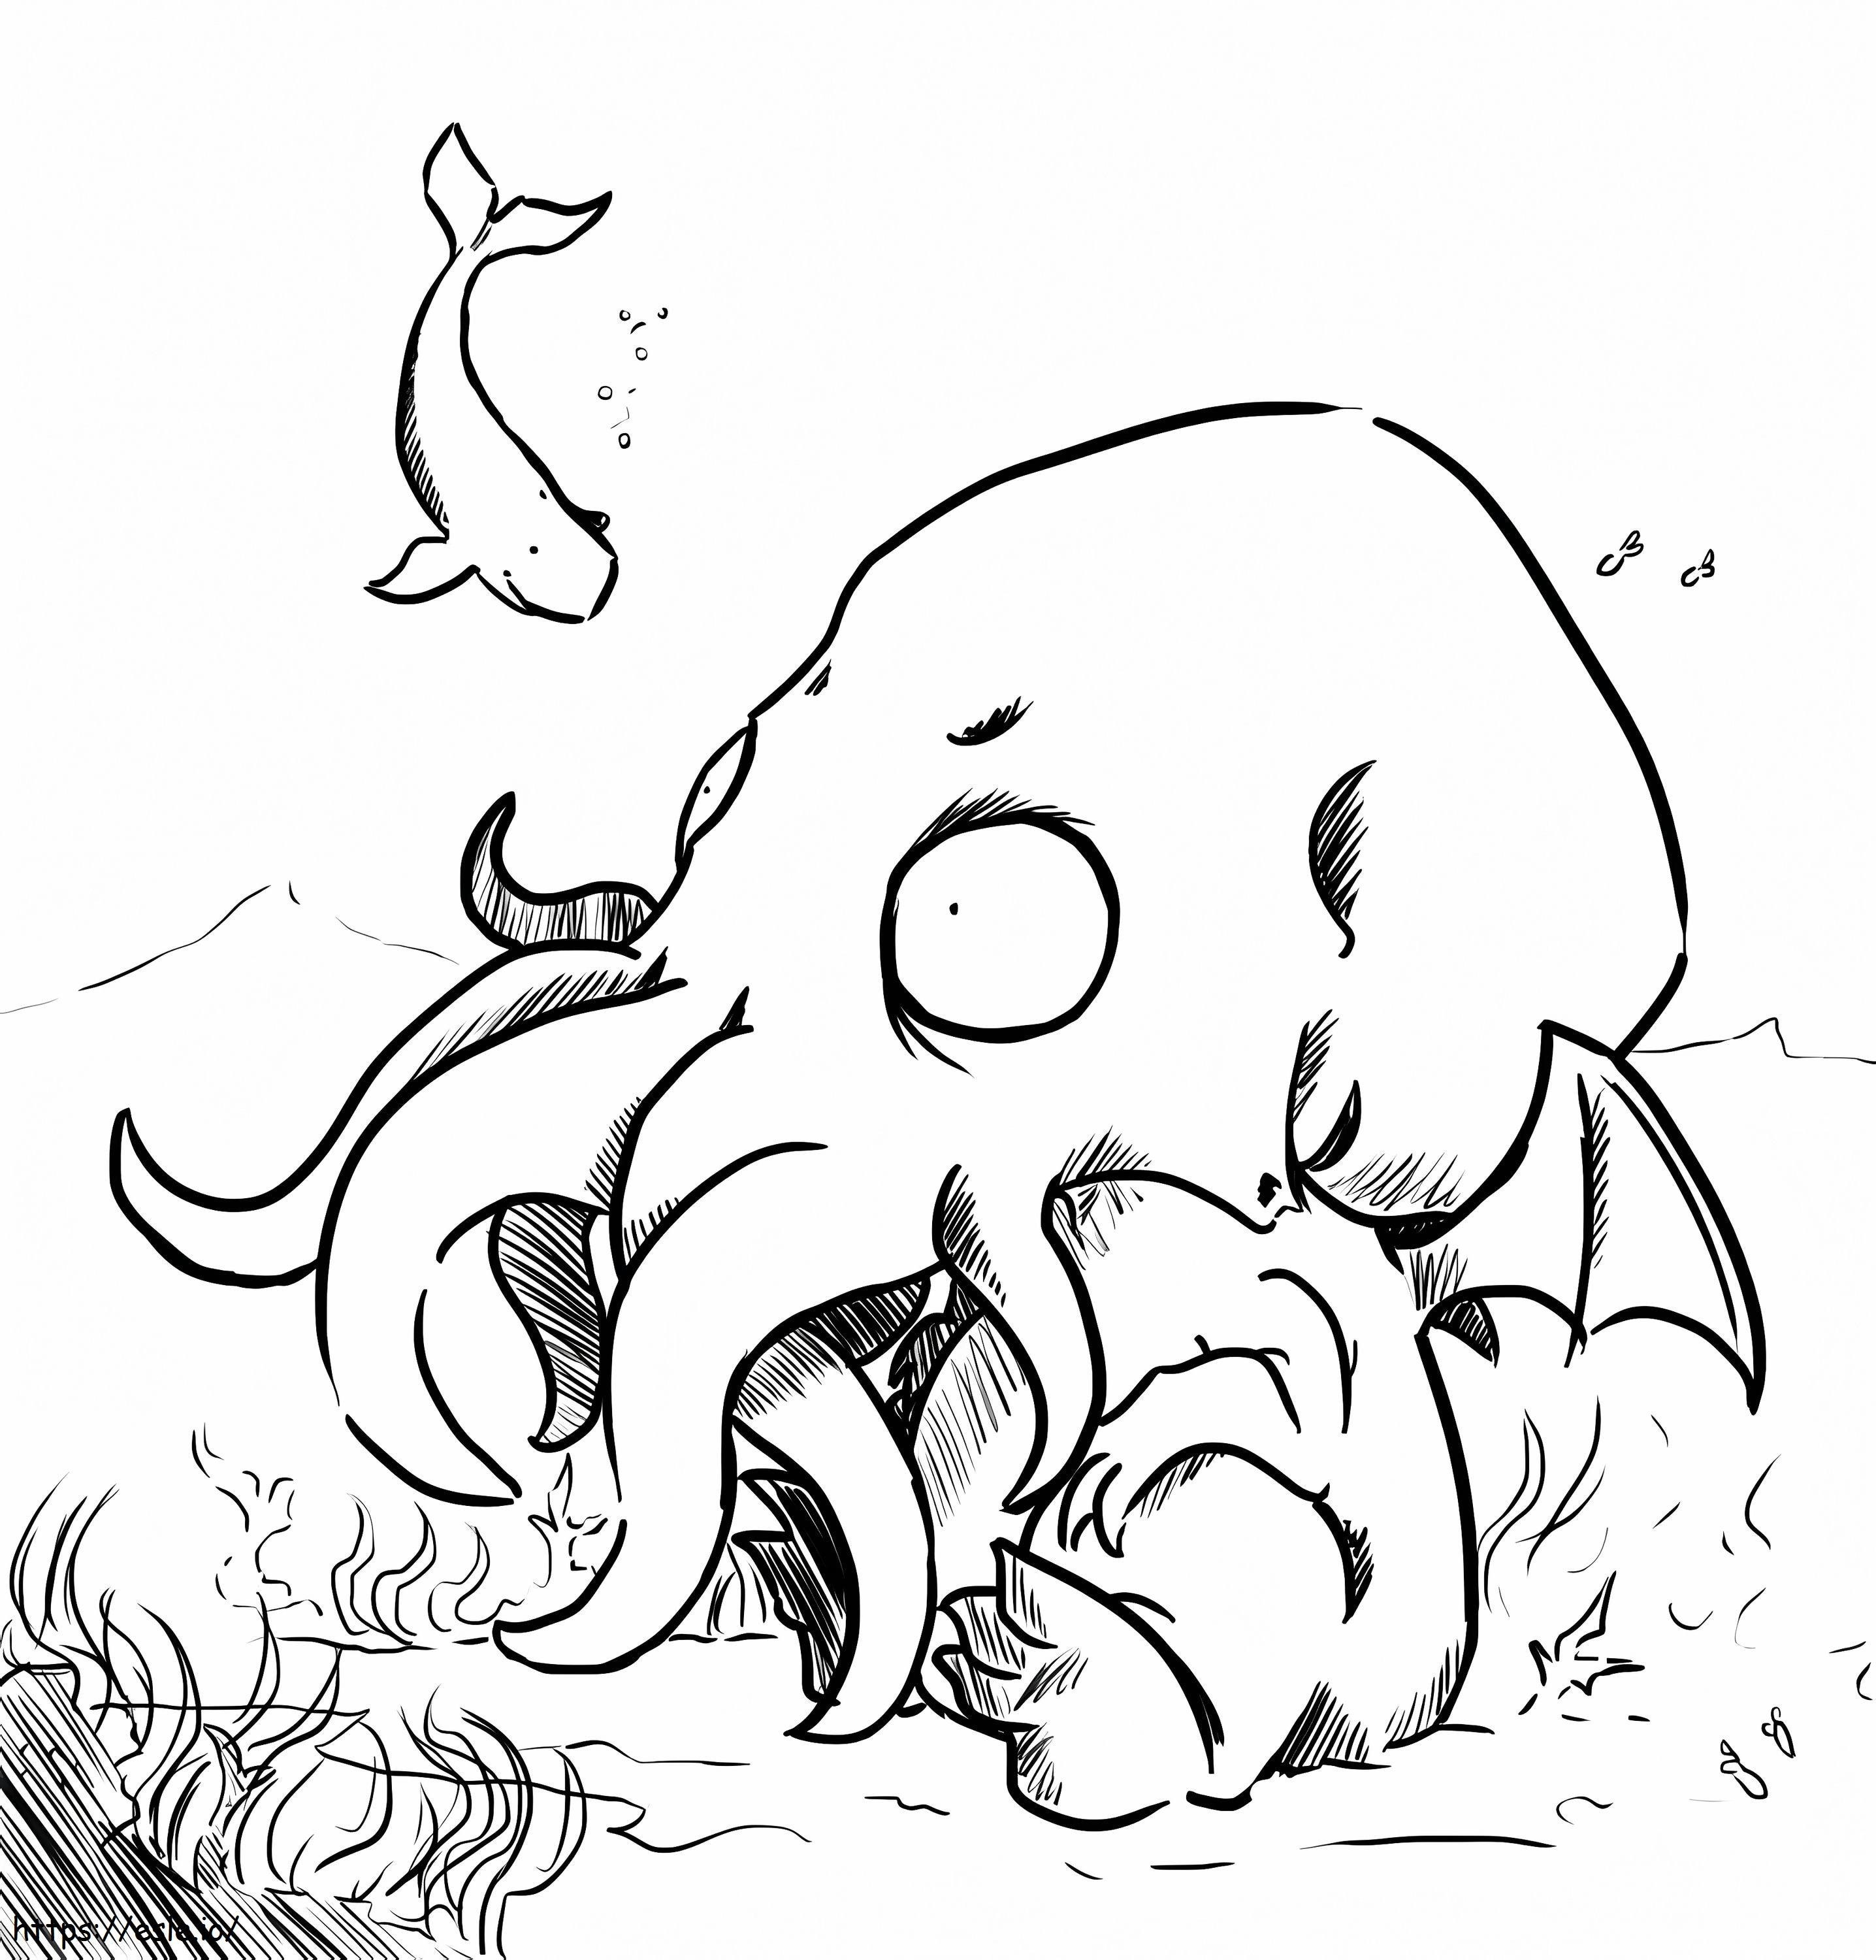 Cthulhu Sketch coloring page